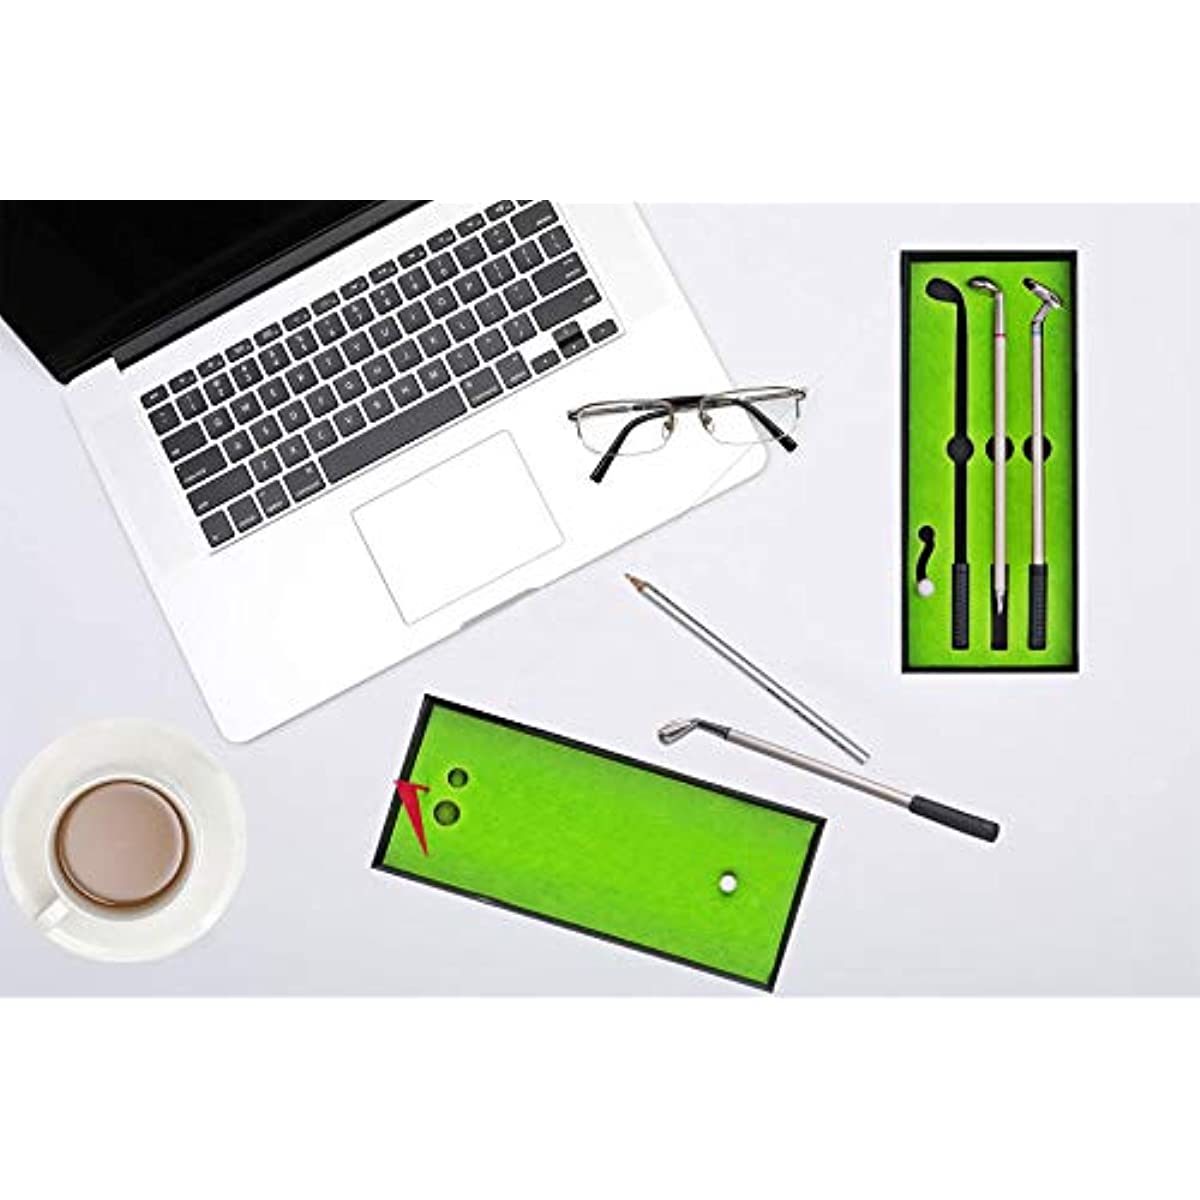 Miniature Golf Pen Gifts for Men Women Unique Christmas Stocking Stuffers; Dad Boss Coworkers Him Boyfriend Golfers Funny Birthday Gifts; Mini Desktop Games Fun Fidget Toys Cool Office Gadgets Desk Decor with various clubs and balls displayed in two green, lined boxes, one with multiple clubs and the other featuring a single club and two holes – a unique novelty gift for any golf enthusiast